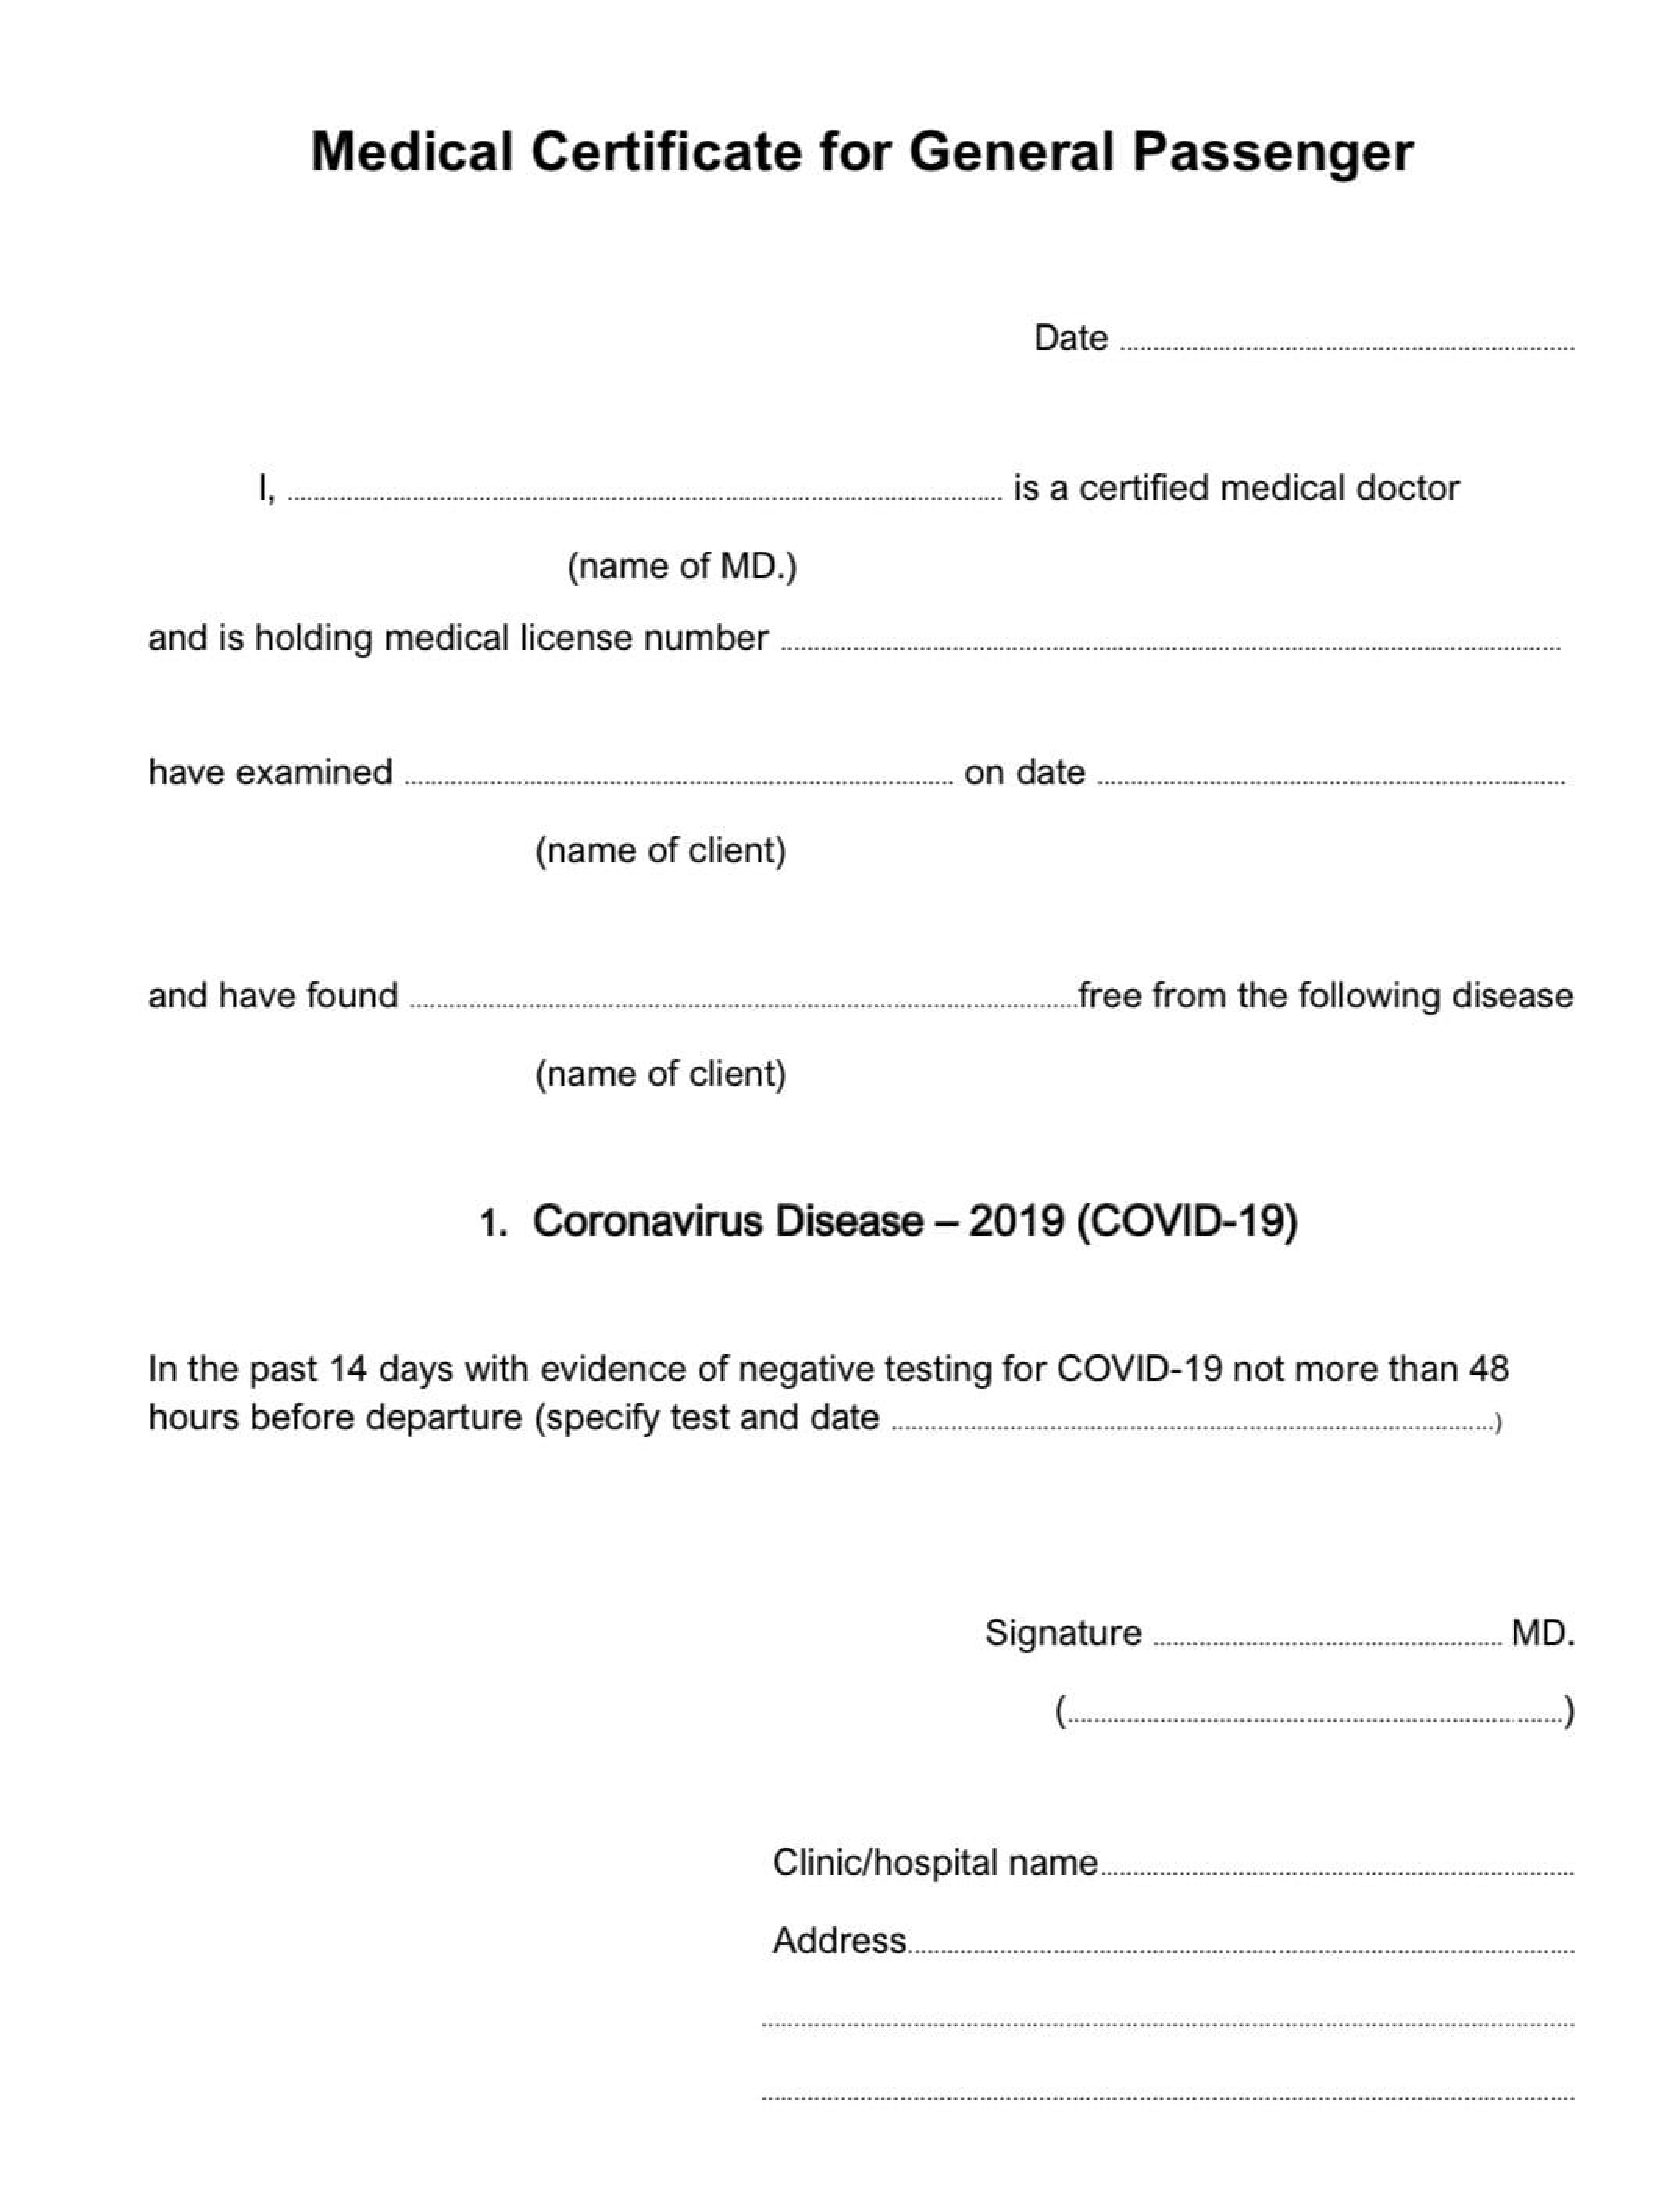 Kostenloses COVID22 Medical Certificate Fit to Fly Regarding Fake Medical Certificate Template Download